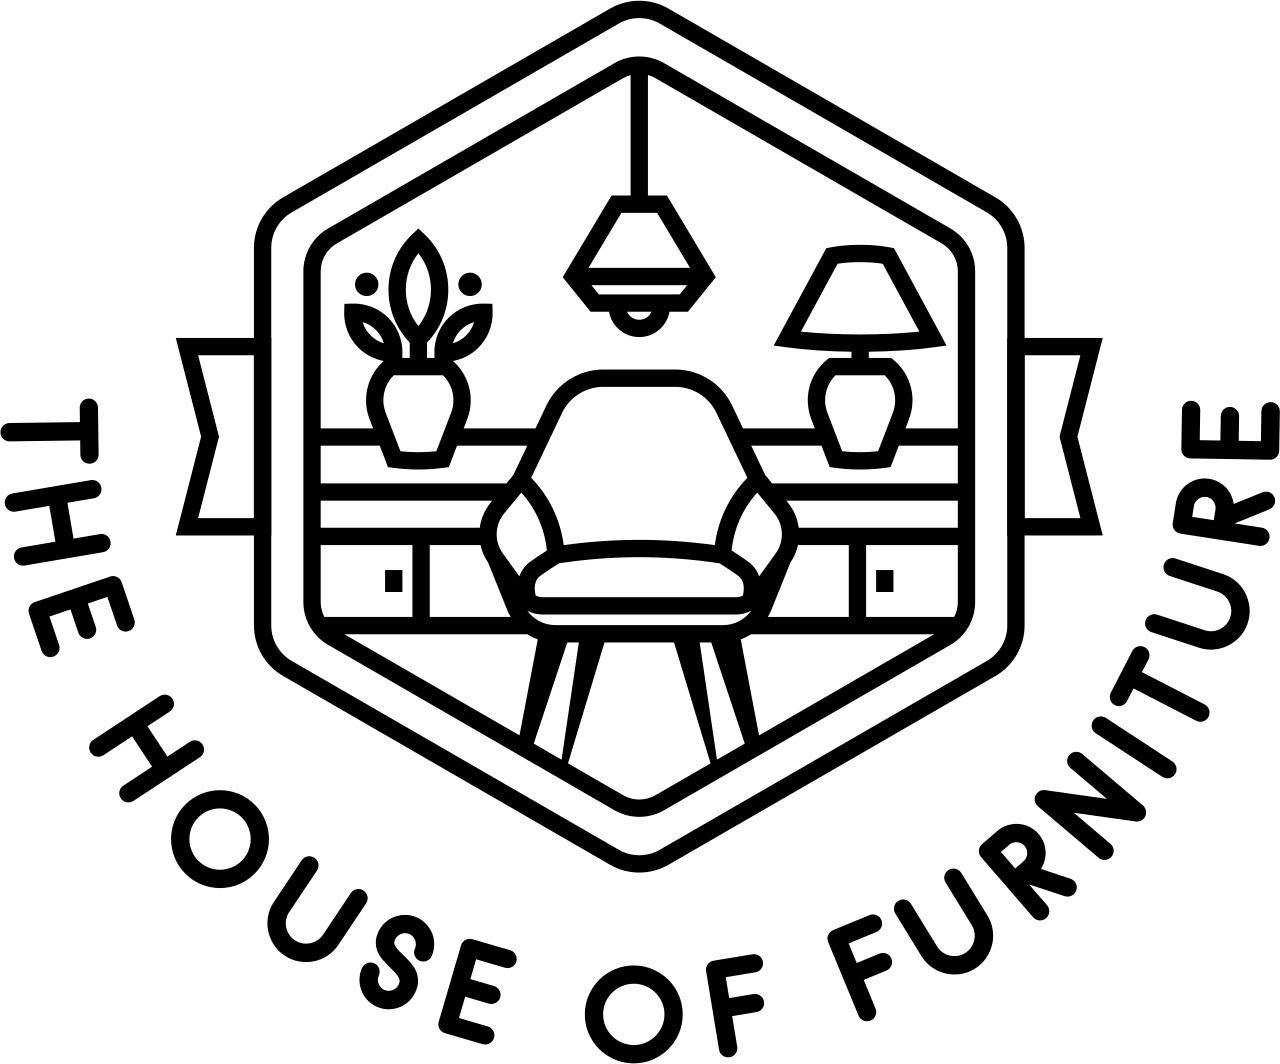 The House of Furniture